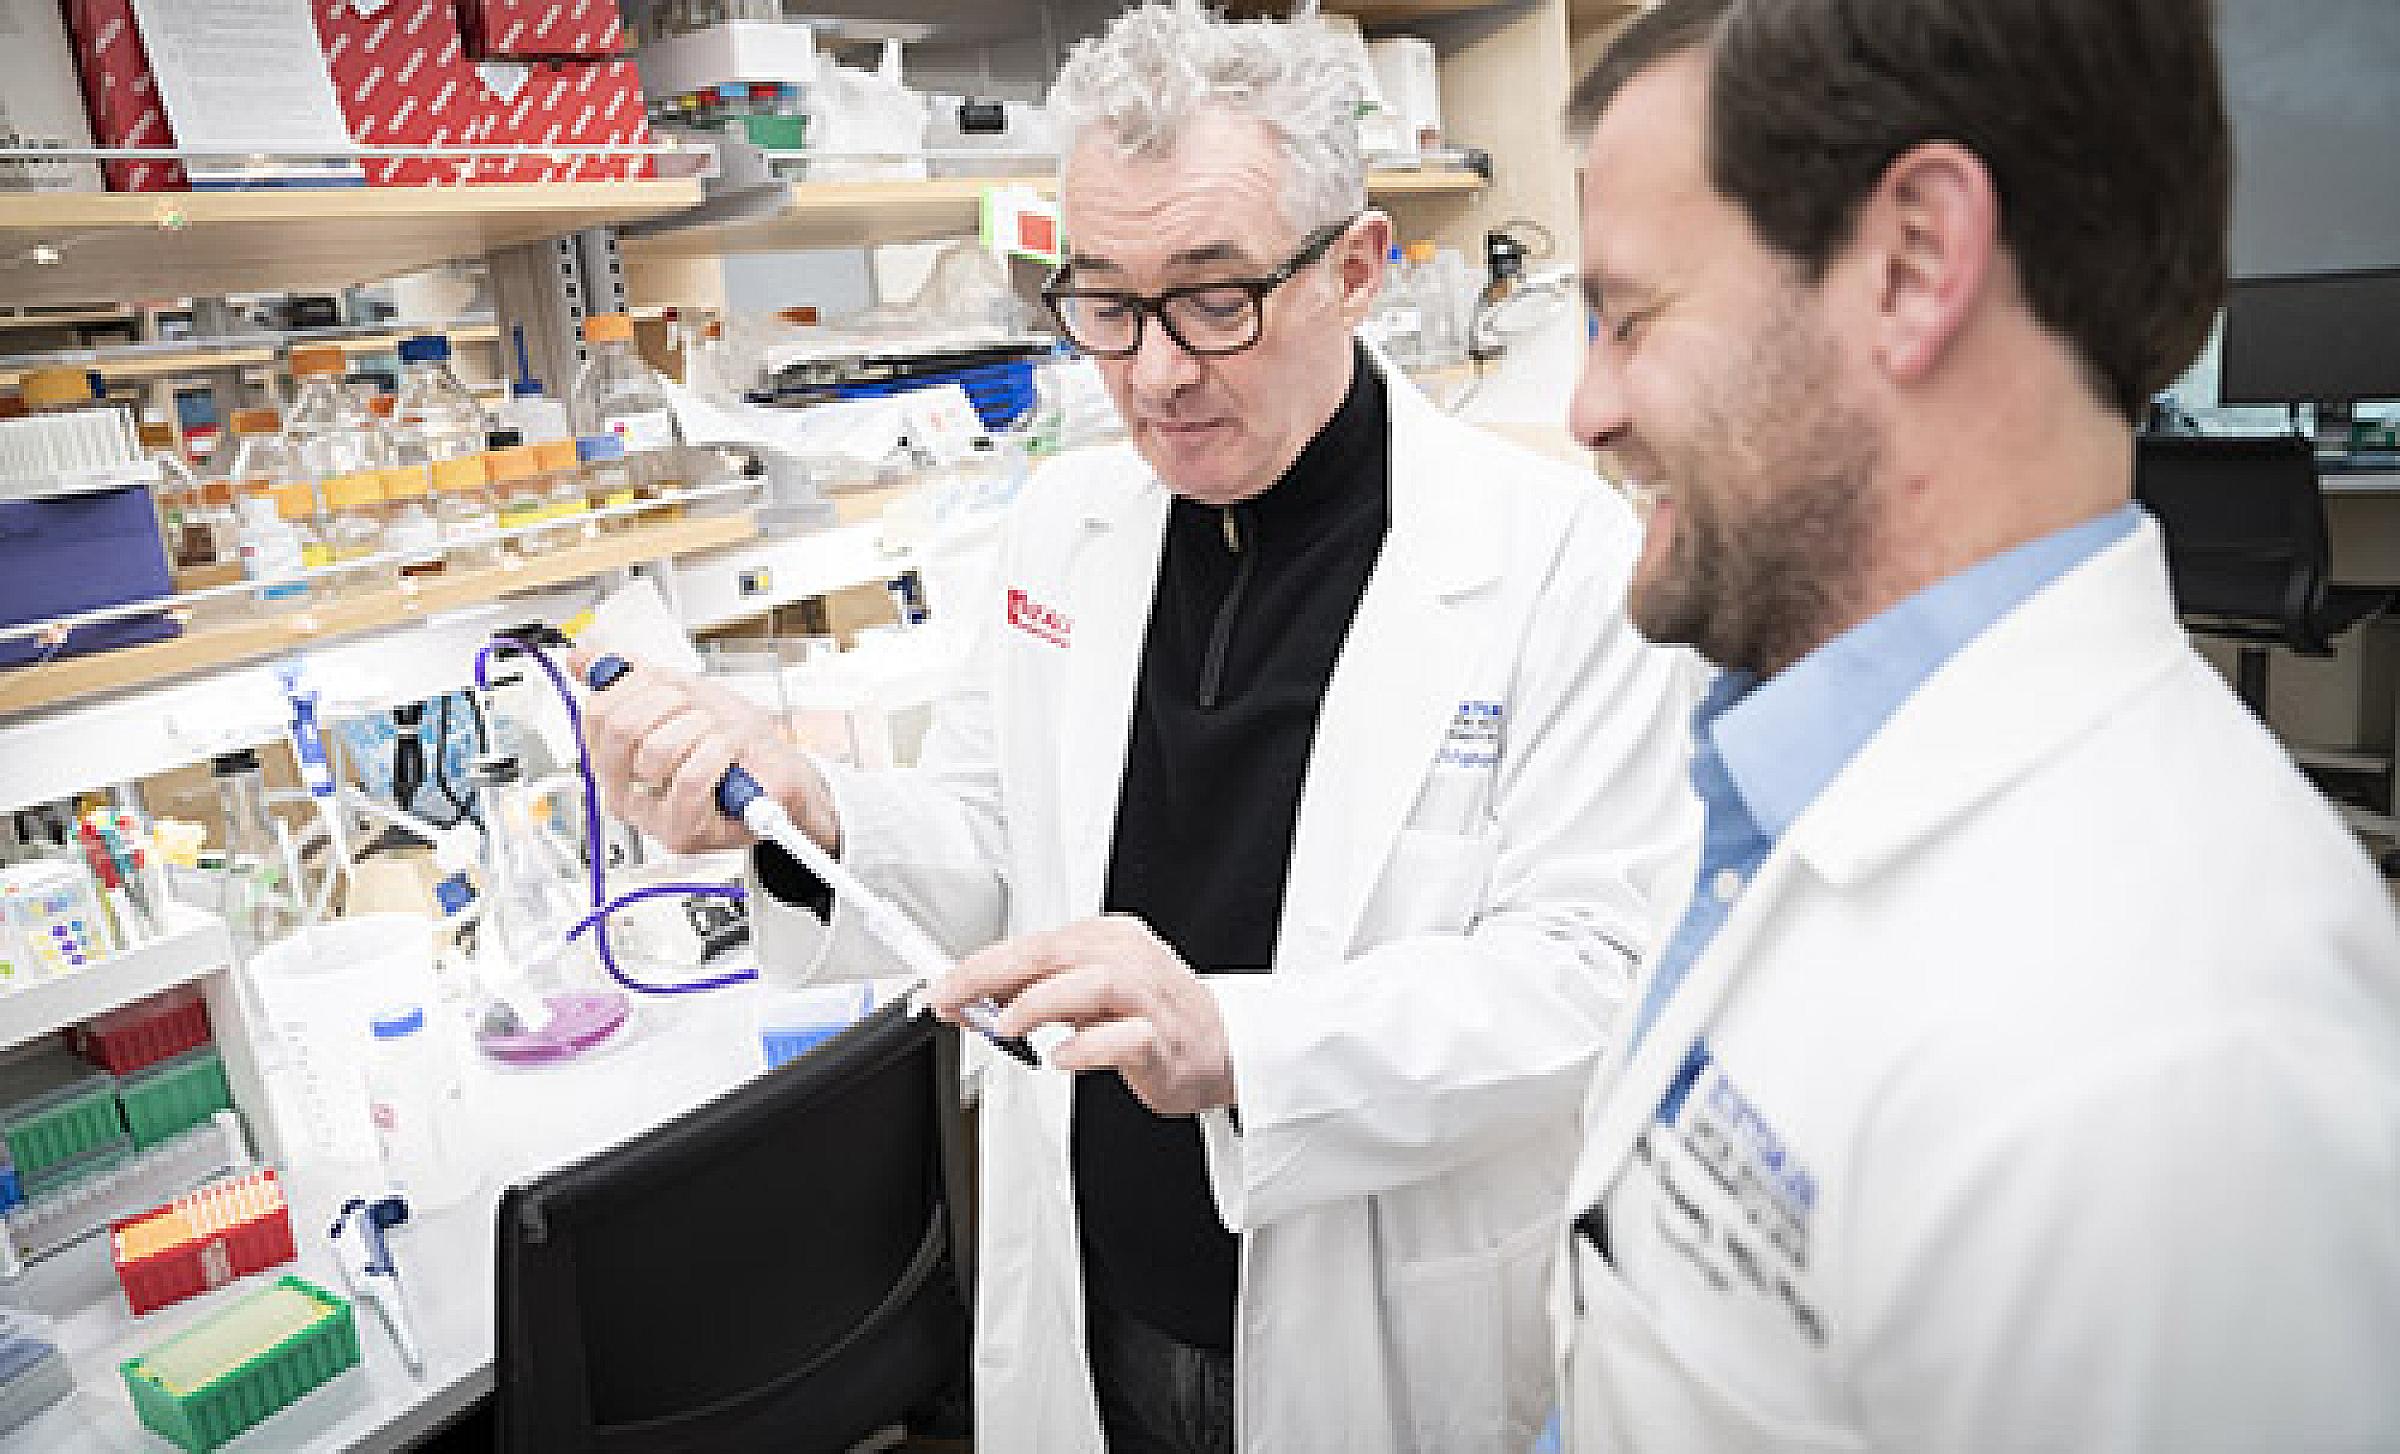 Martin McMahon, PhD and Conan Kinsey, MD in the lab